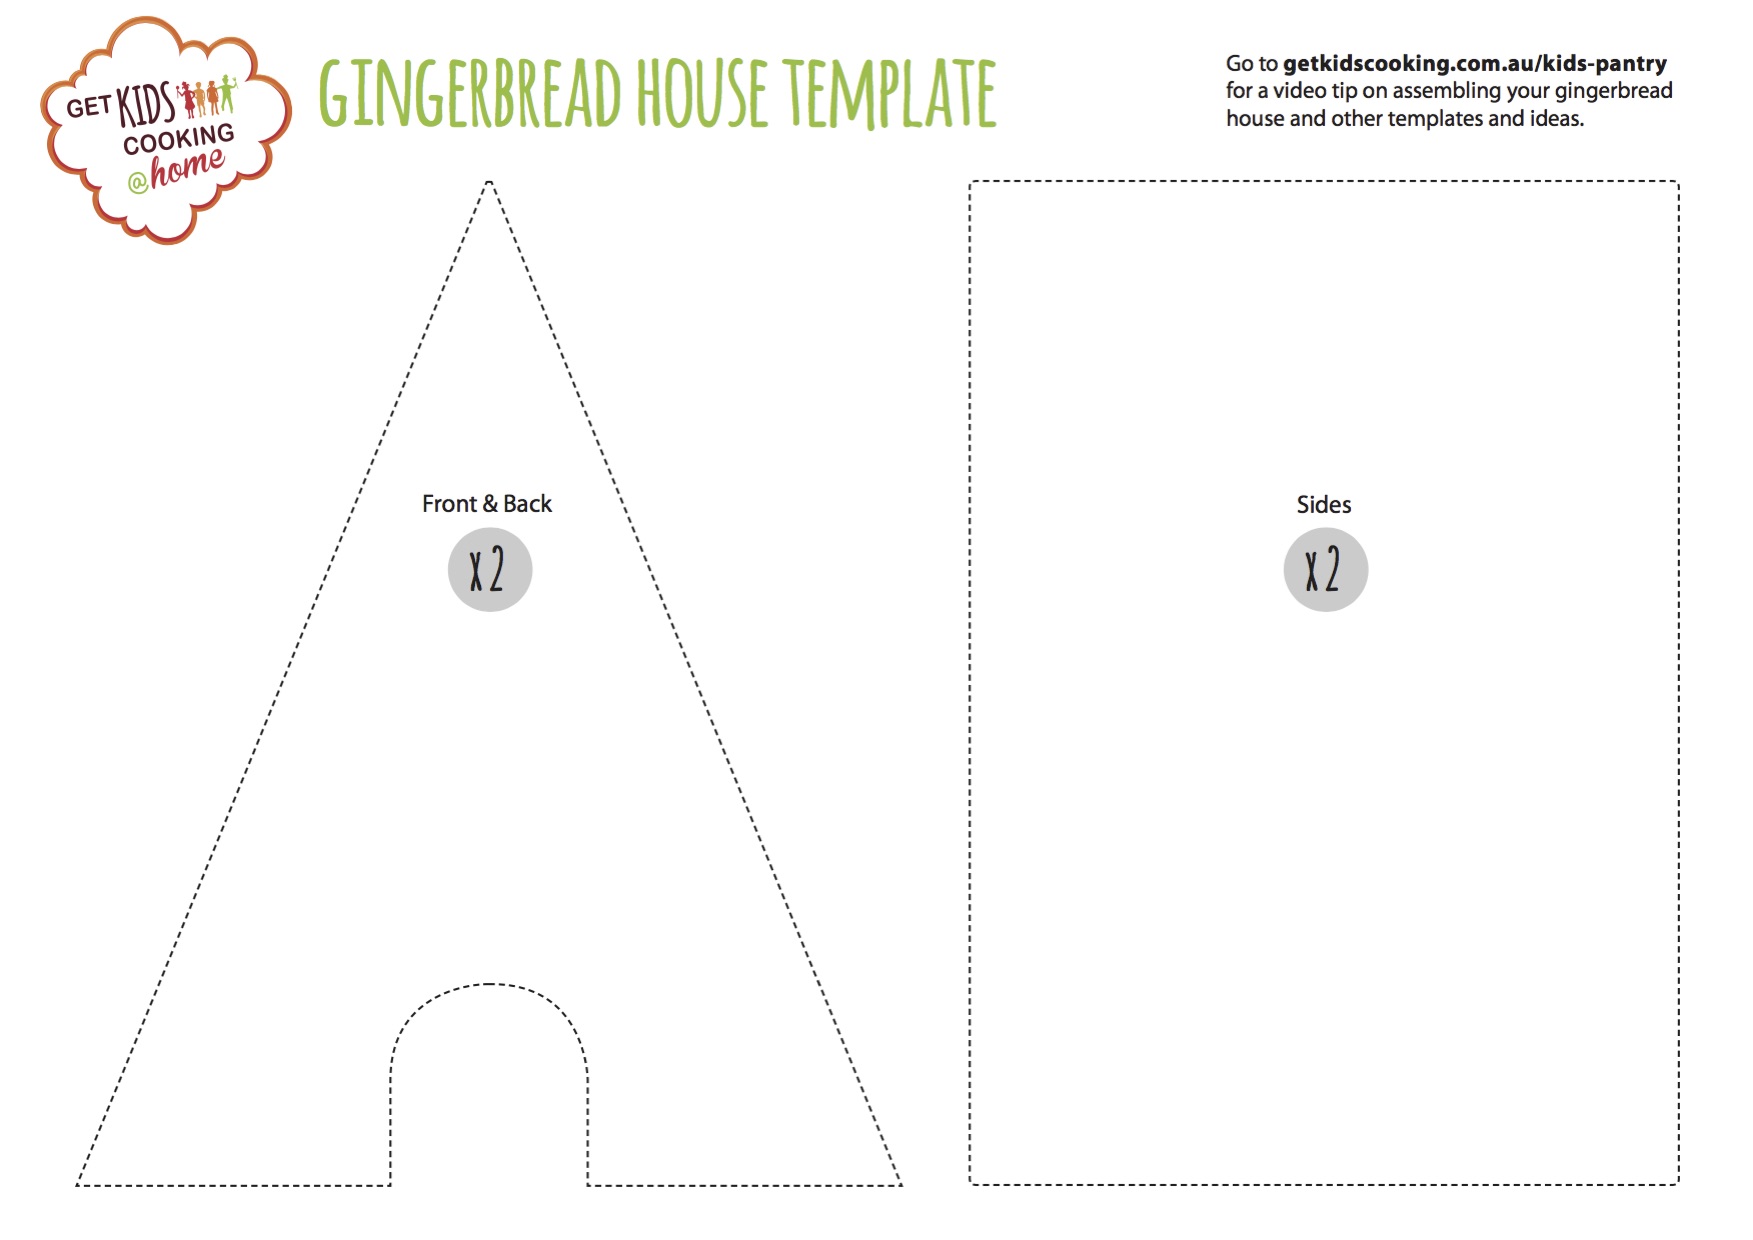 gingerbread-house-template-get-kids-cooking-inventors-of-the